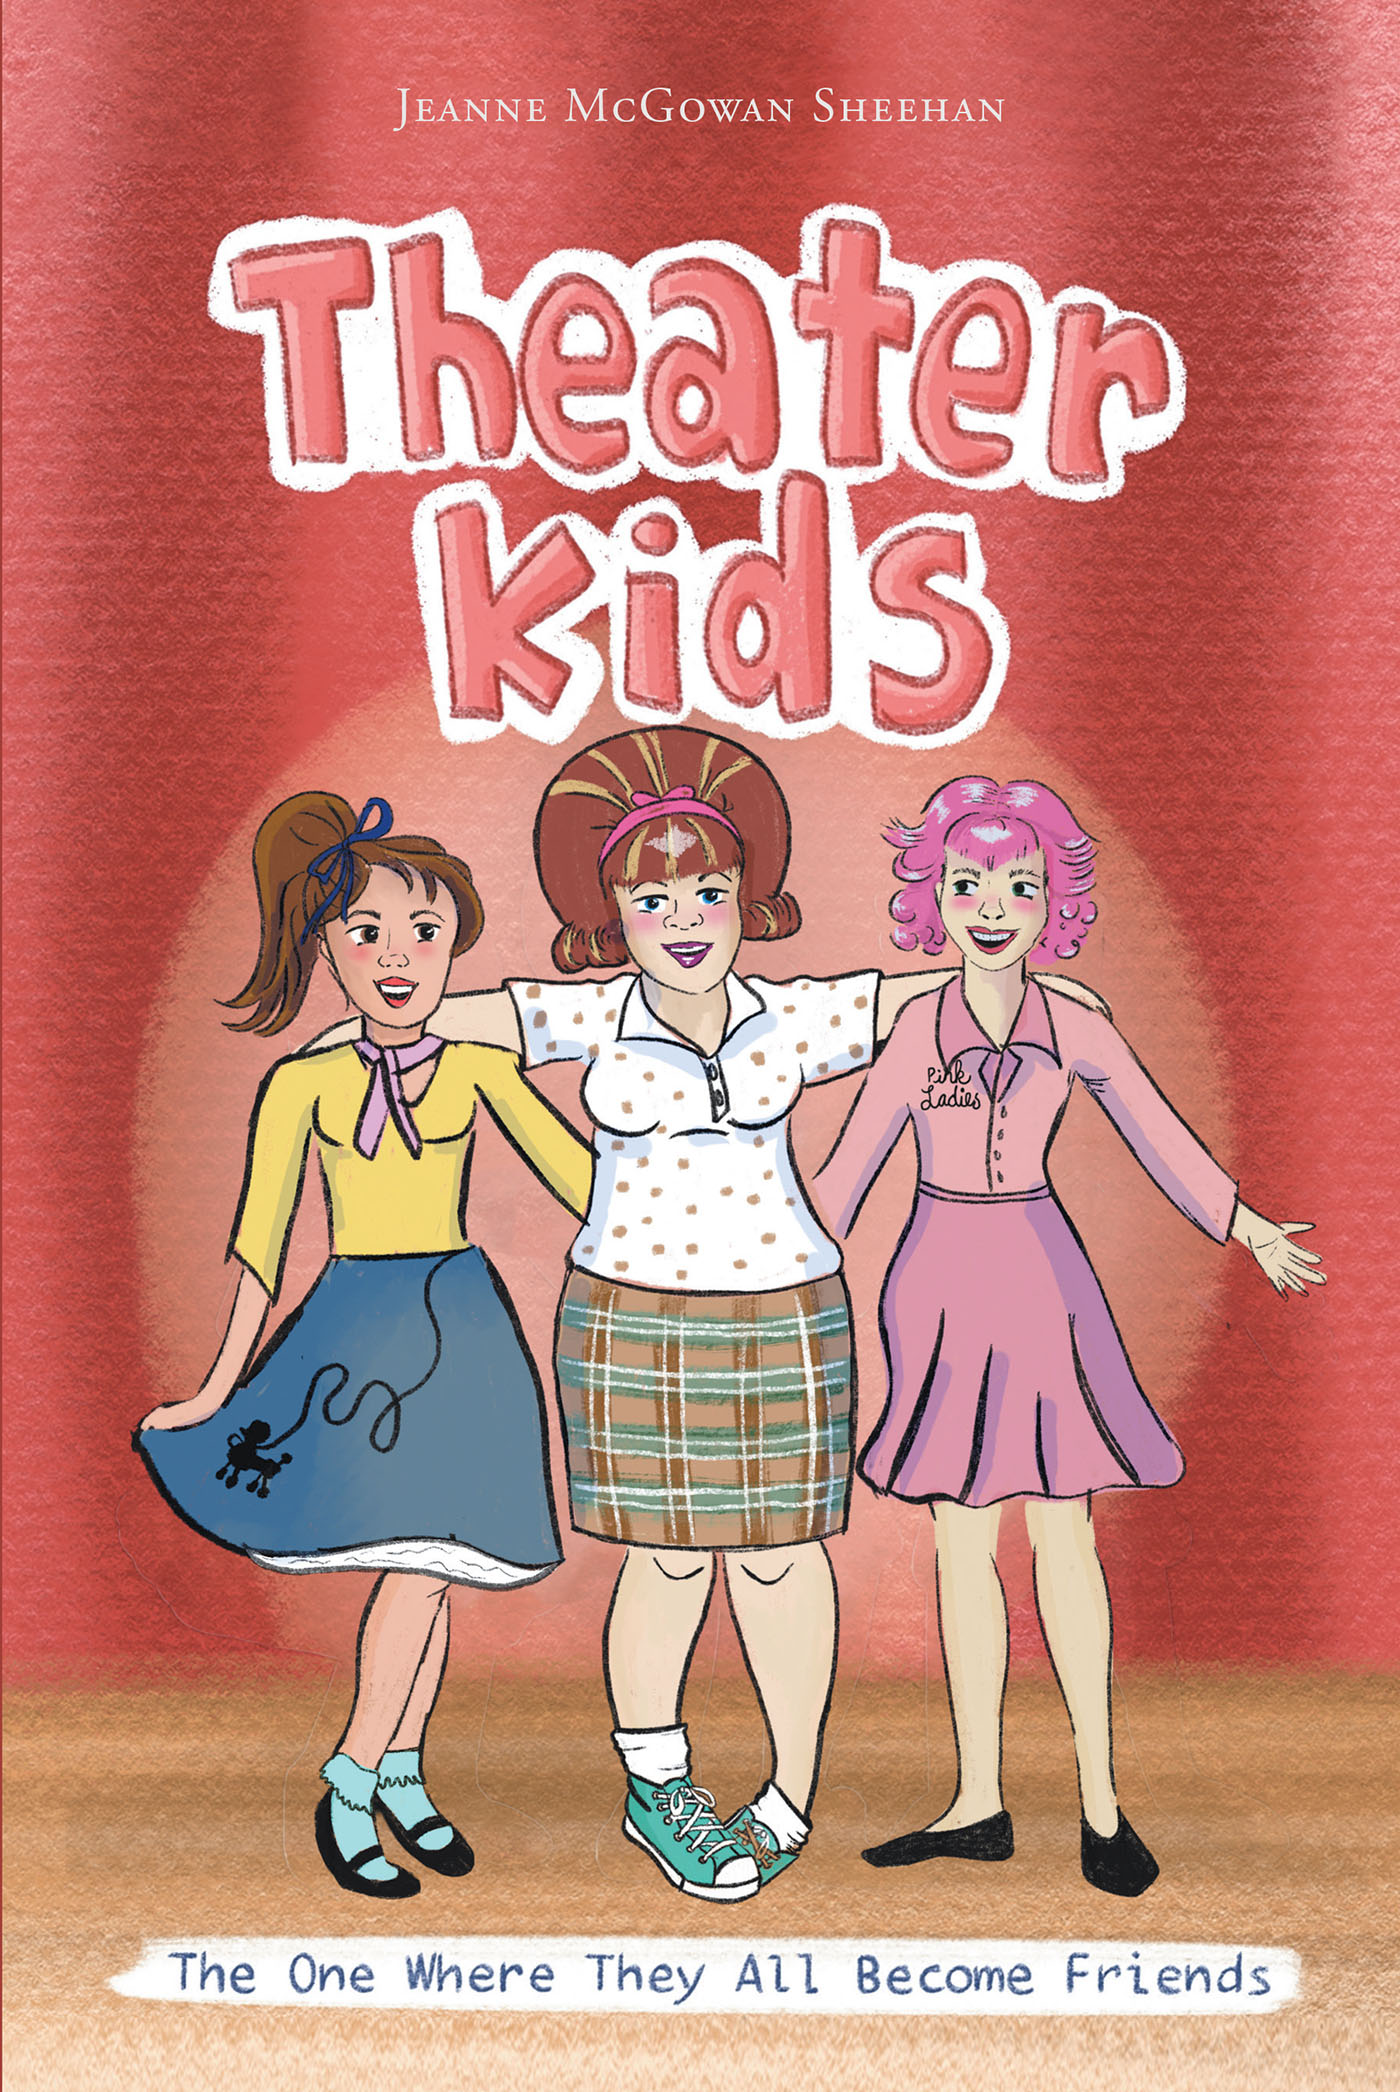 Author Jeanne McGowan Sheehan’s New Book, "Theater Kids: The One Where They All Become Friends," is a Heartwarming Coming-of-Age Story Following Three Middle Schoolers